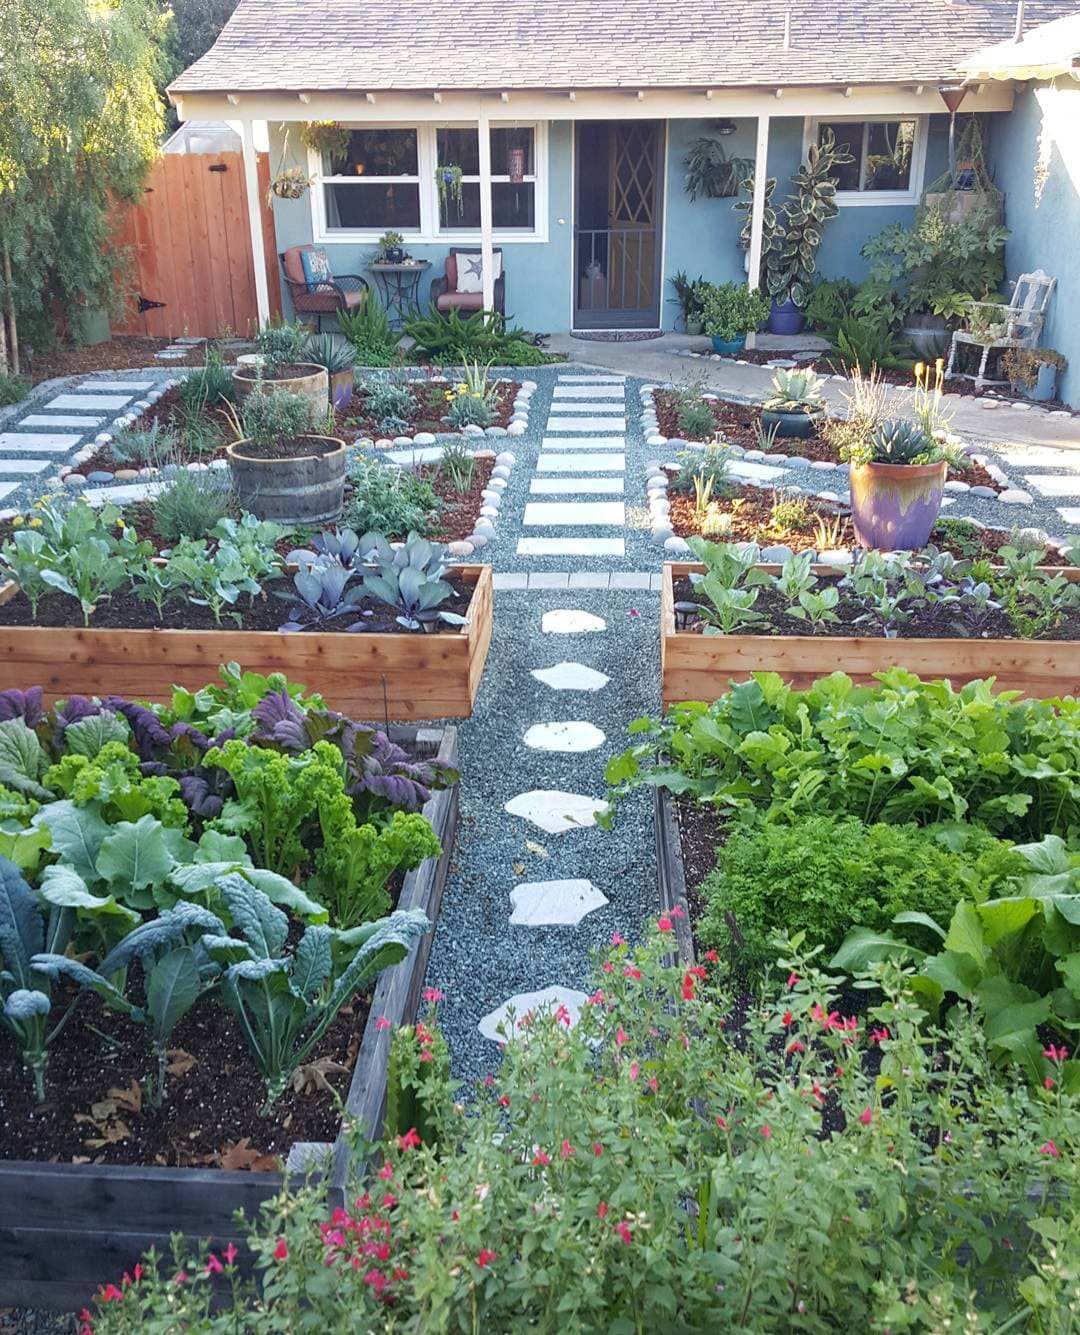 A view of the front of a blue green house, in the foreground lies four raised garden beds that are filled with cool season vegetables such as kale, mustard greens, bok choy, radish, carrots, cabbage, and cauliflower. There are gravel lined pathways with stone pavers leading towards the house. There are four smaller planting islands that are in ground with perennial and annual plants closer to the house.